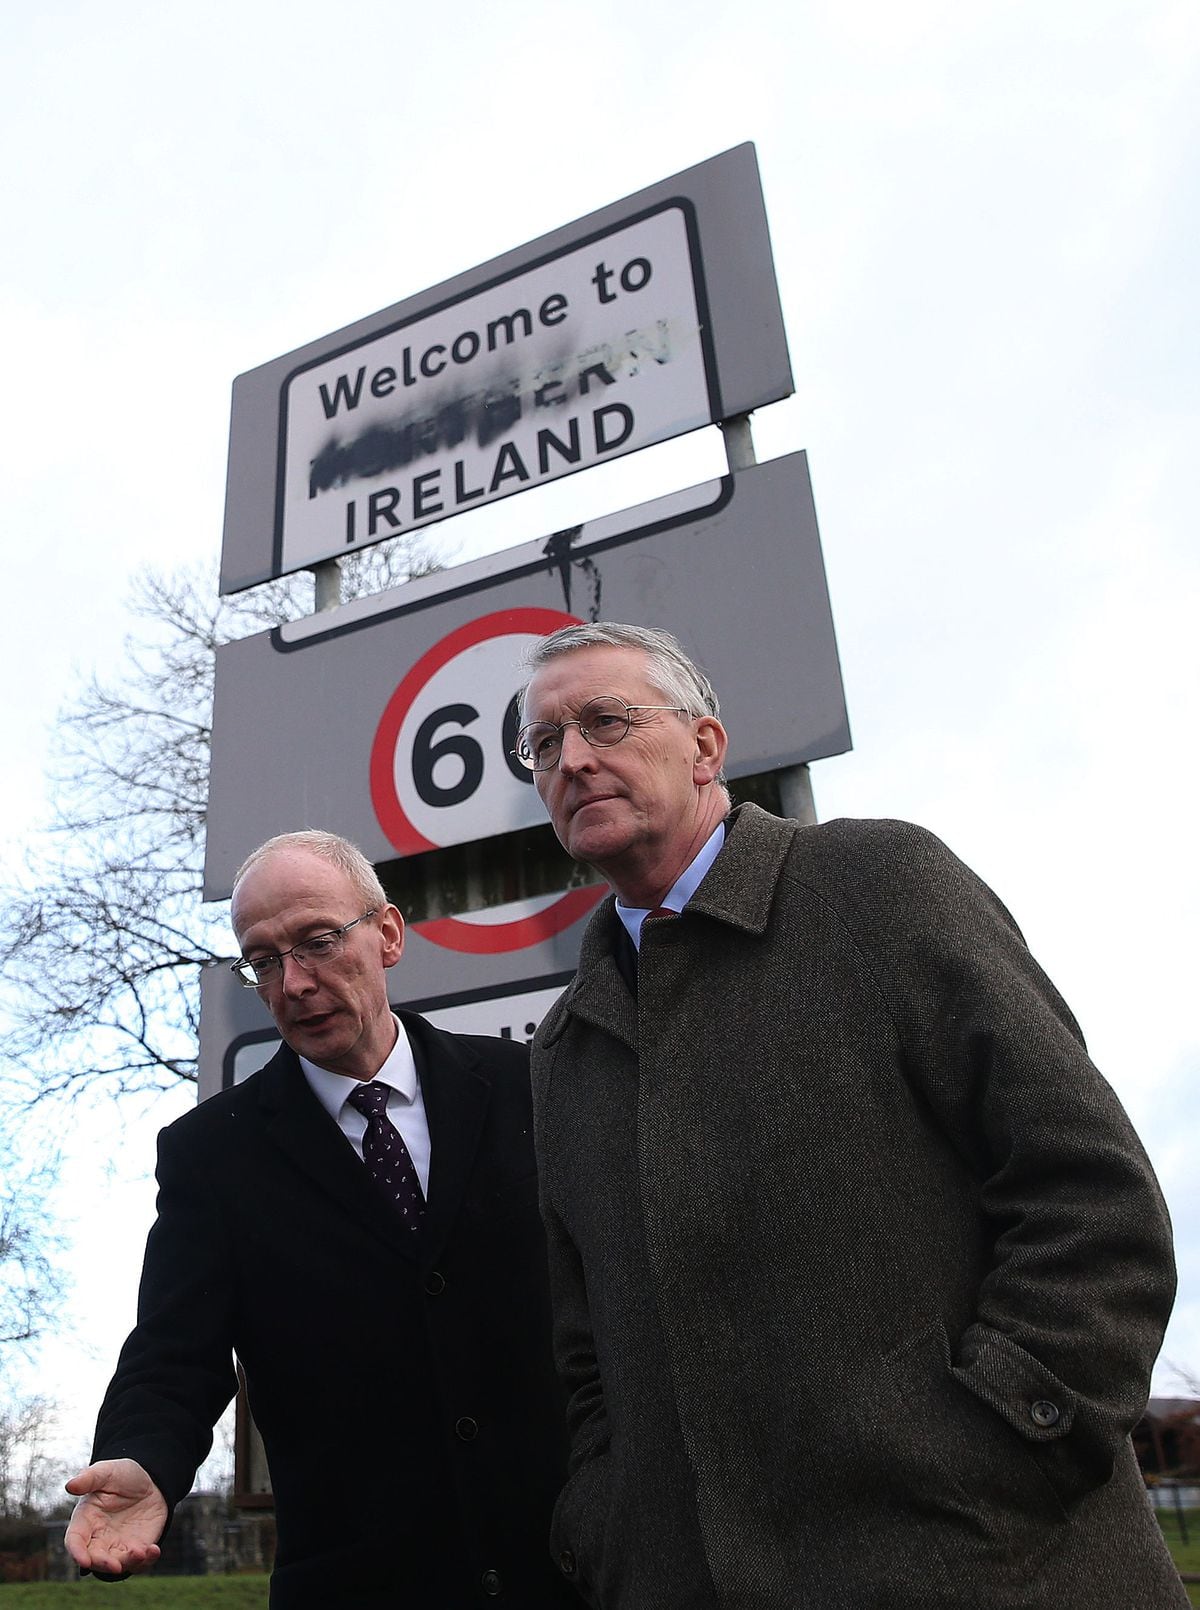 Hillary Benn (right), Chair of The House of Commons' Brexit Committee, and Pat McFadden MP at the border between Northern Ireland and the Republic of Ireland in Midd